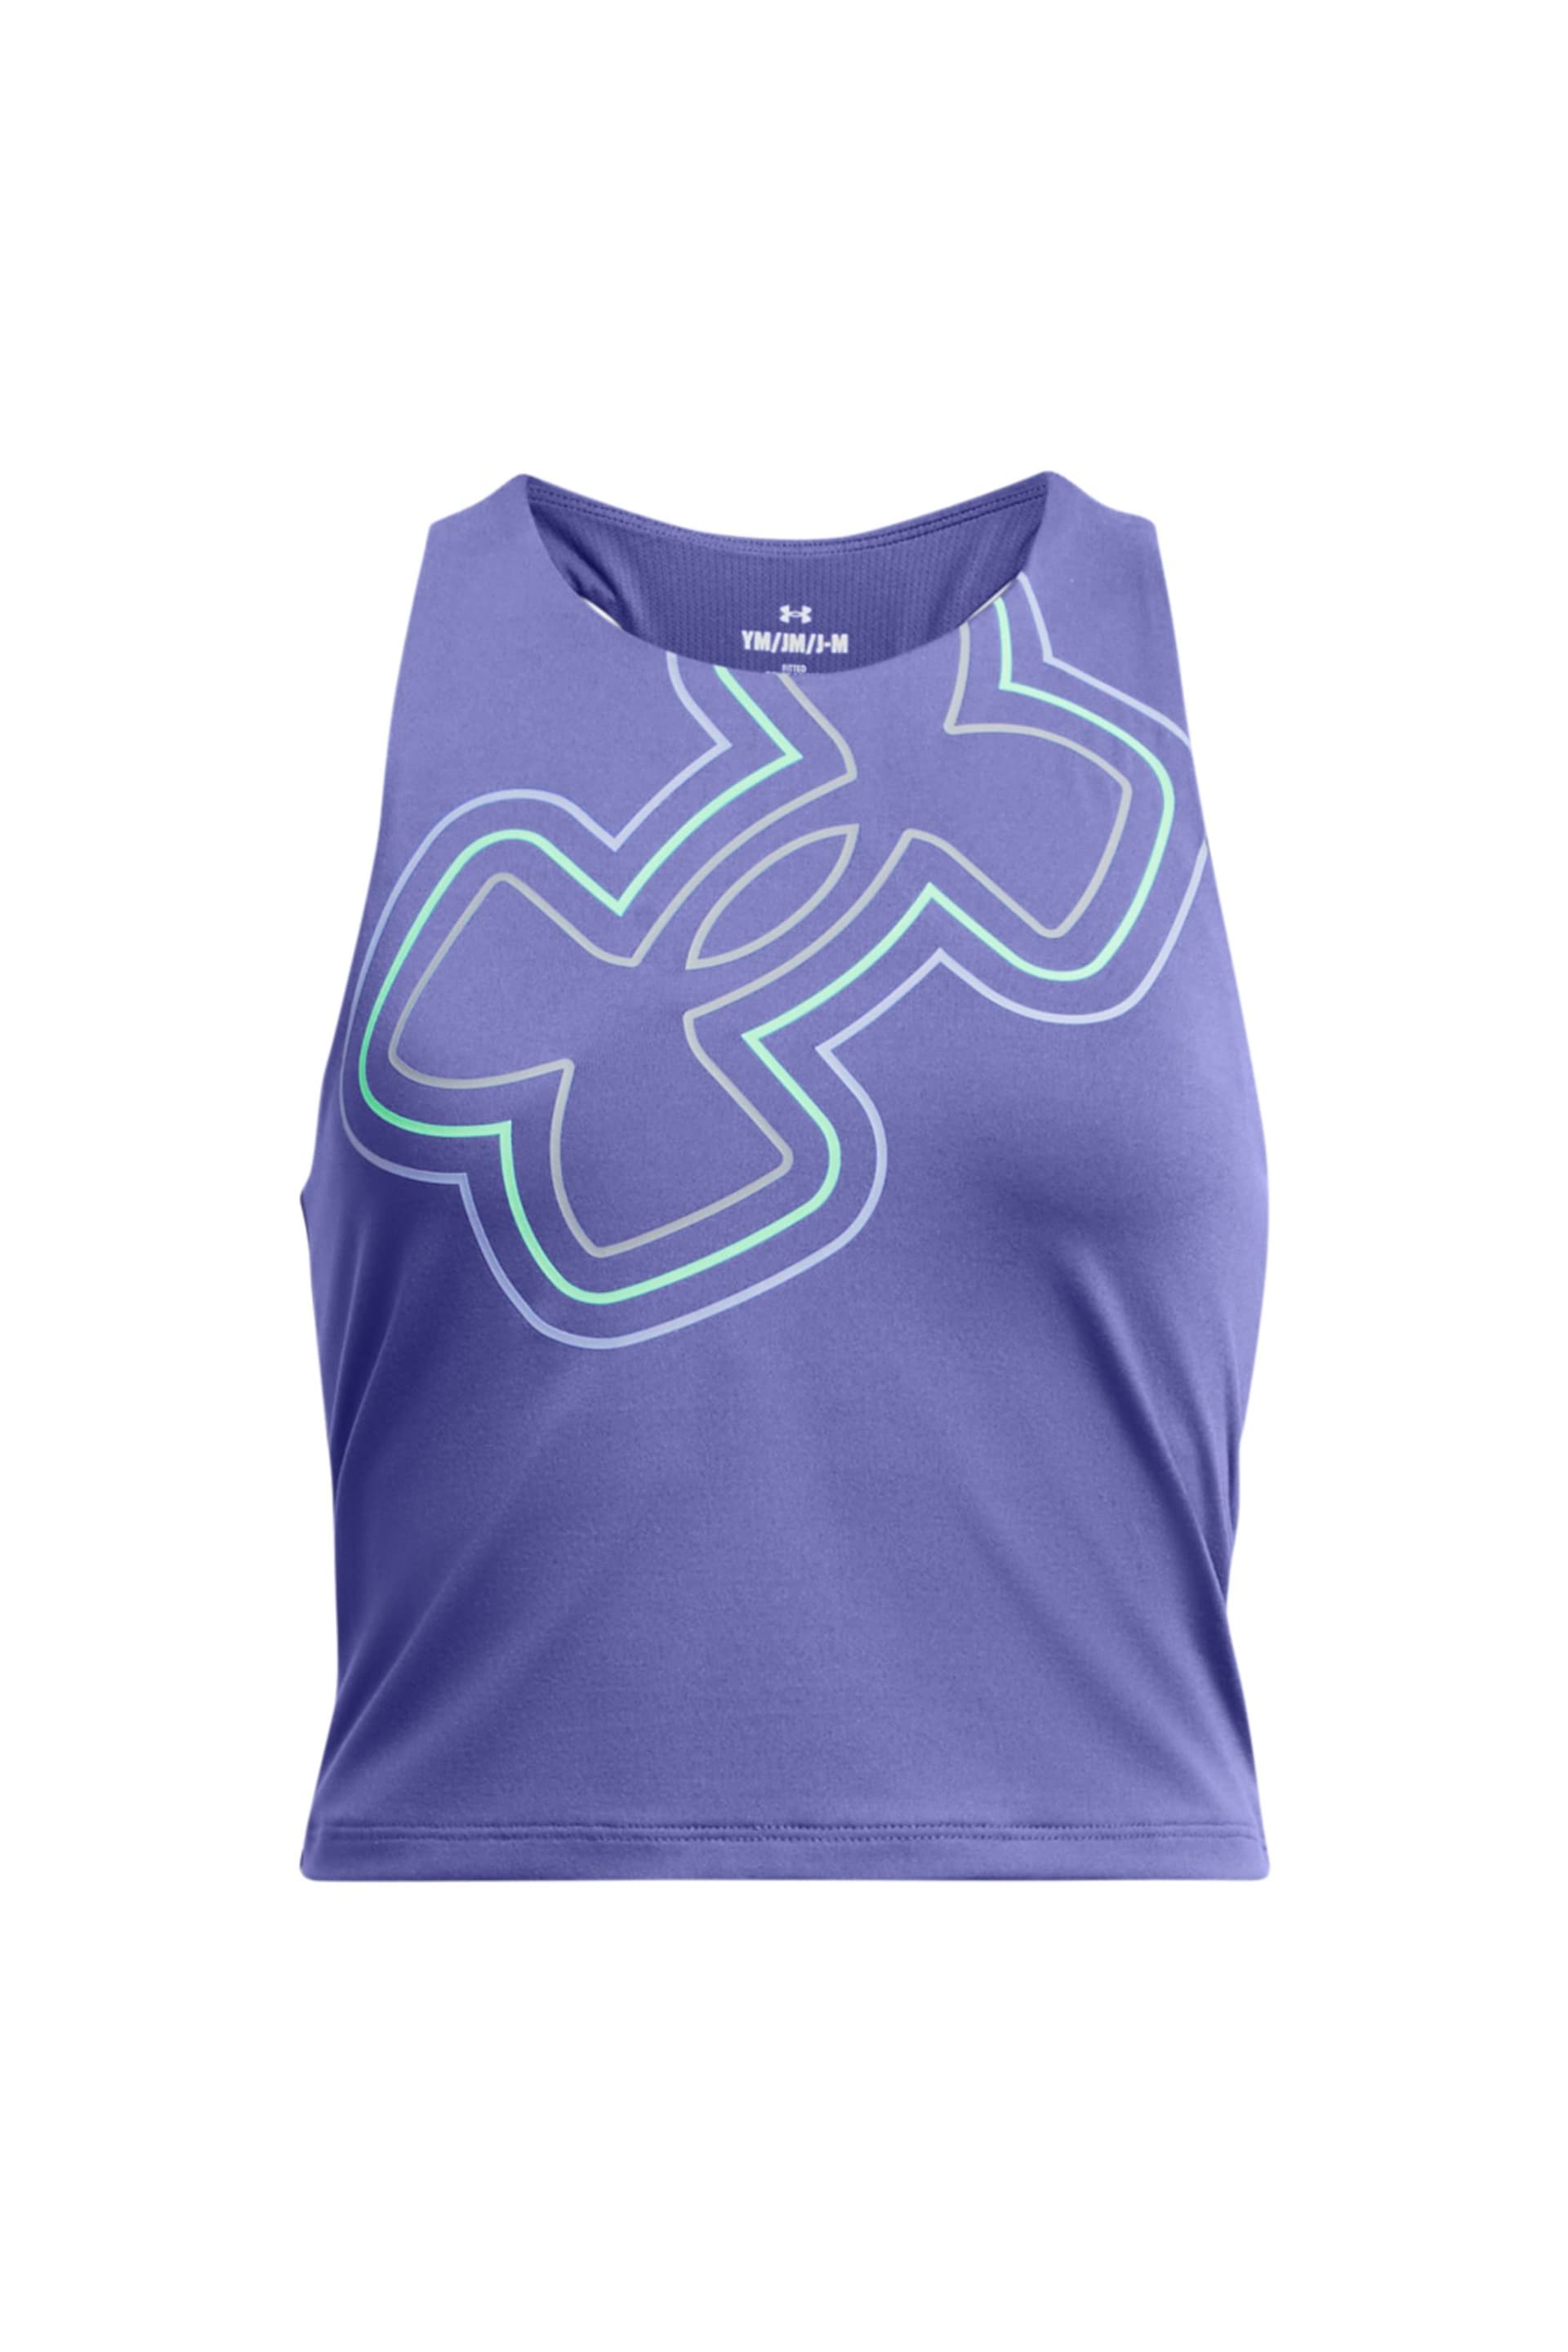 Under Armour Blue/Green Motion Tank Top - Image 1 of 2